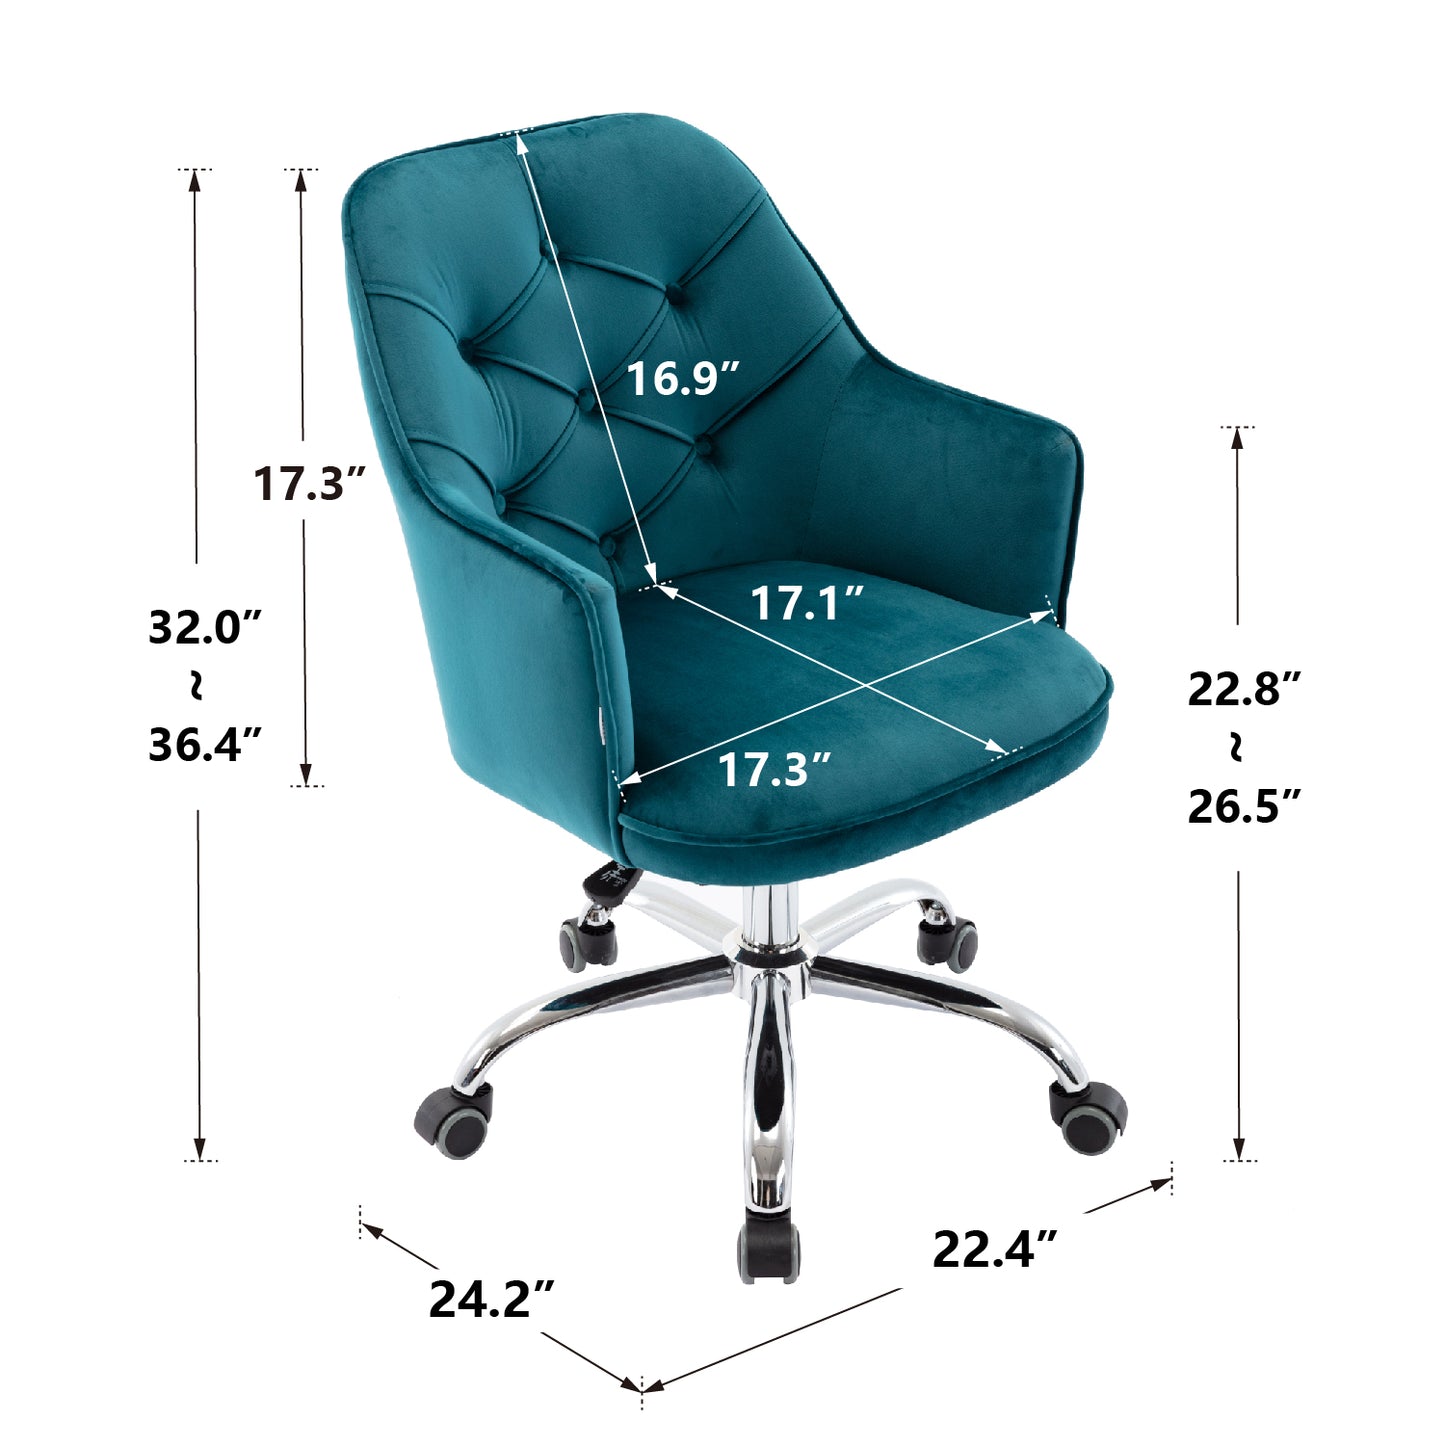 SYNGAR Desk Chairs for Adults, Dark Teal Vanity Stool Chair Velvet with Swivel Wheels and Back for Home, Office Chair Adjustable Height, LJ2286